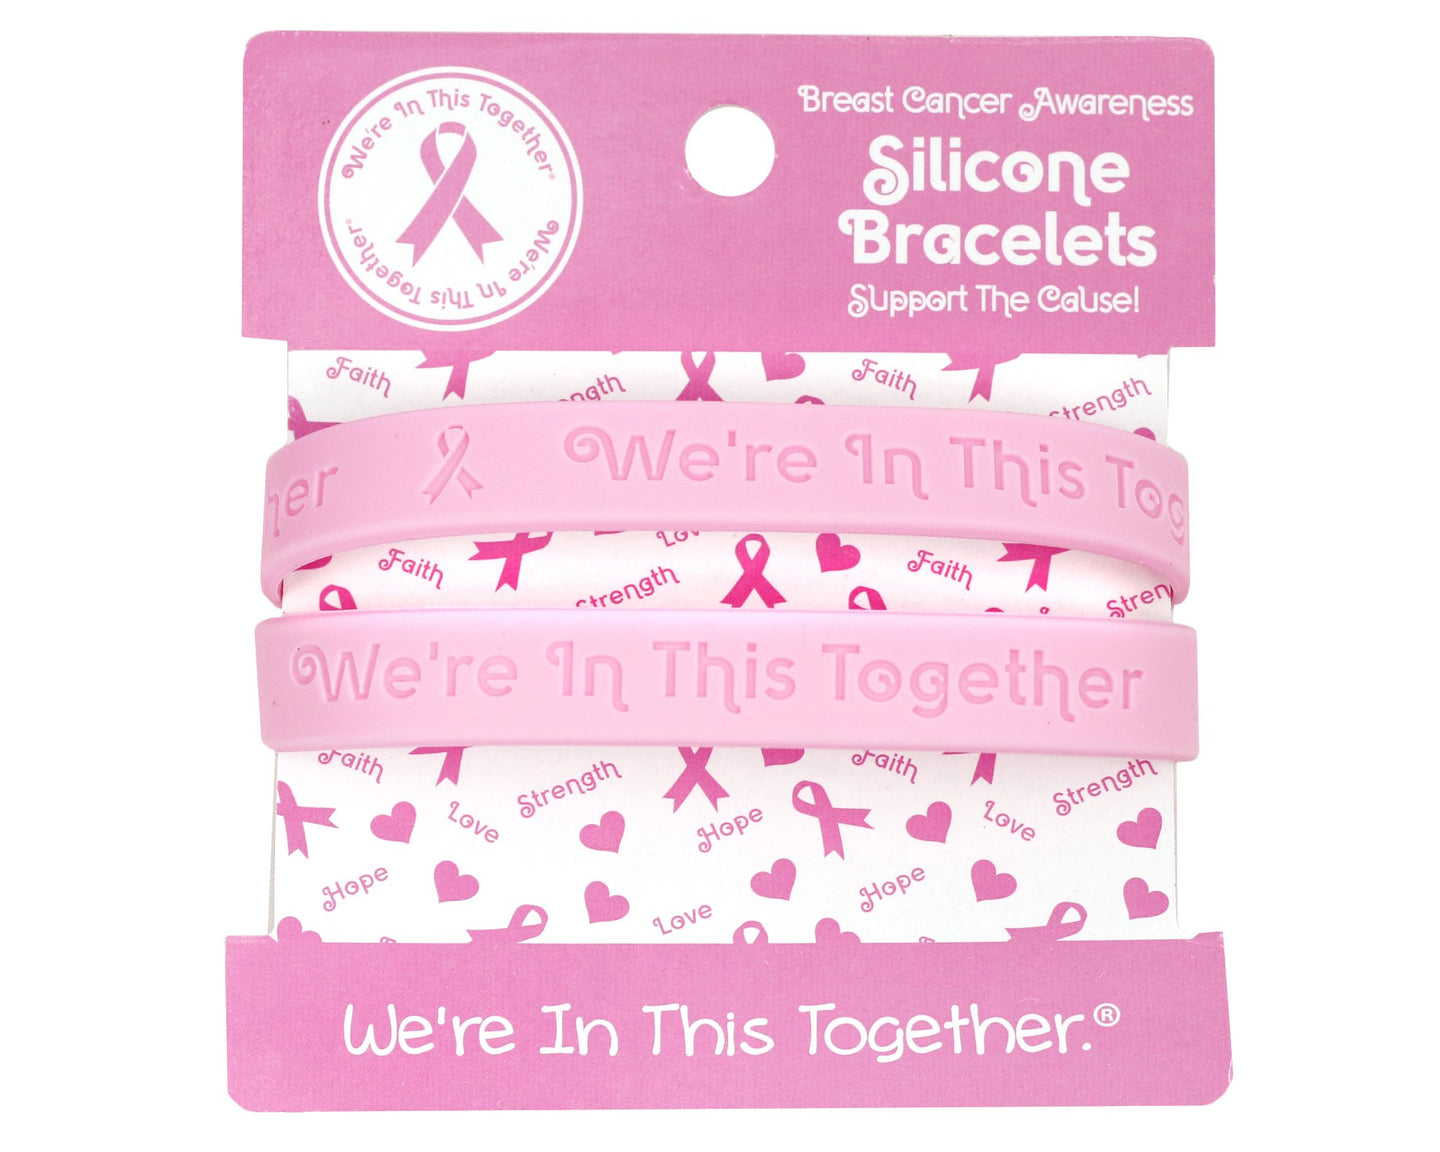 We're In This Together Pink Silicone Bracelets (1 Card with 2 Bracelets)